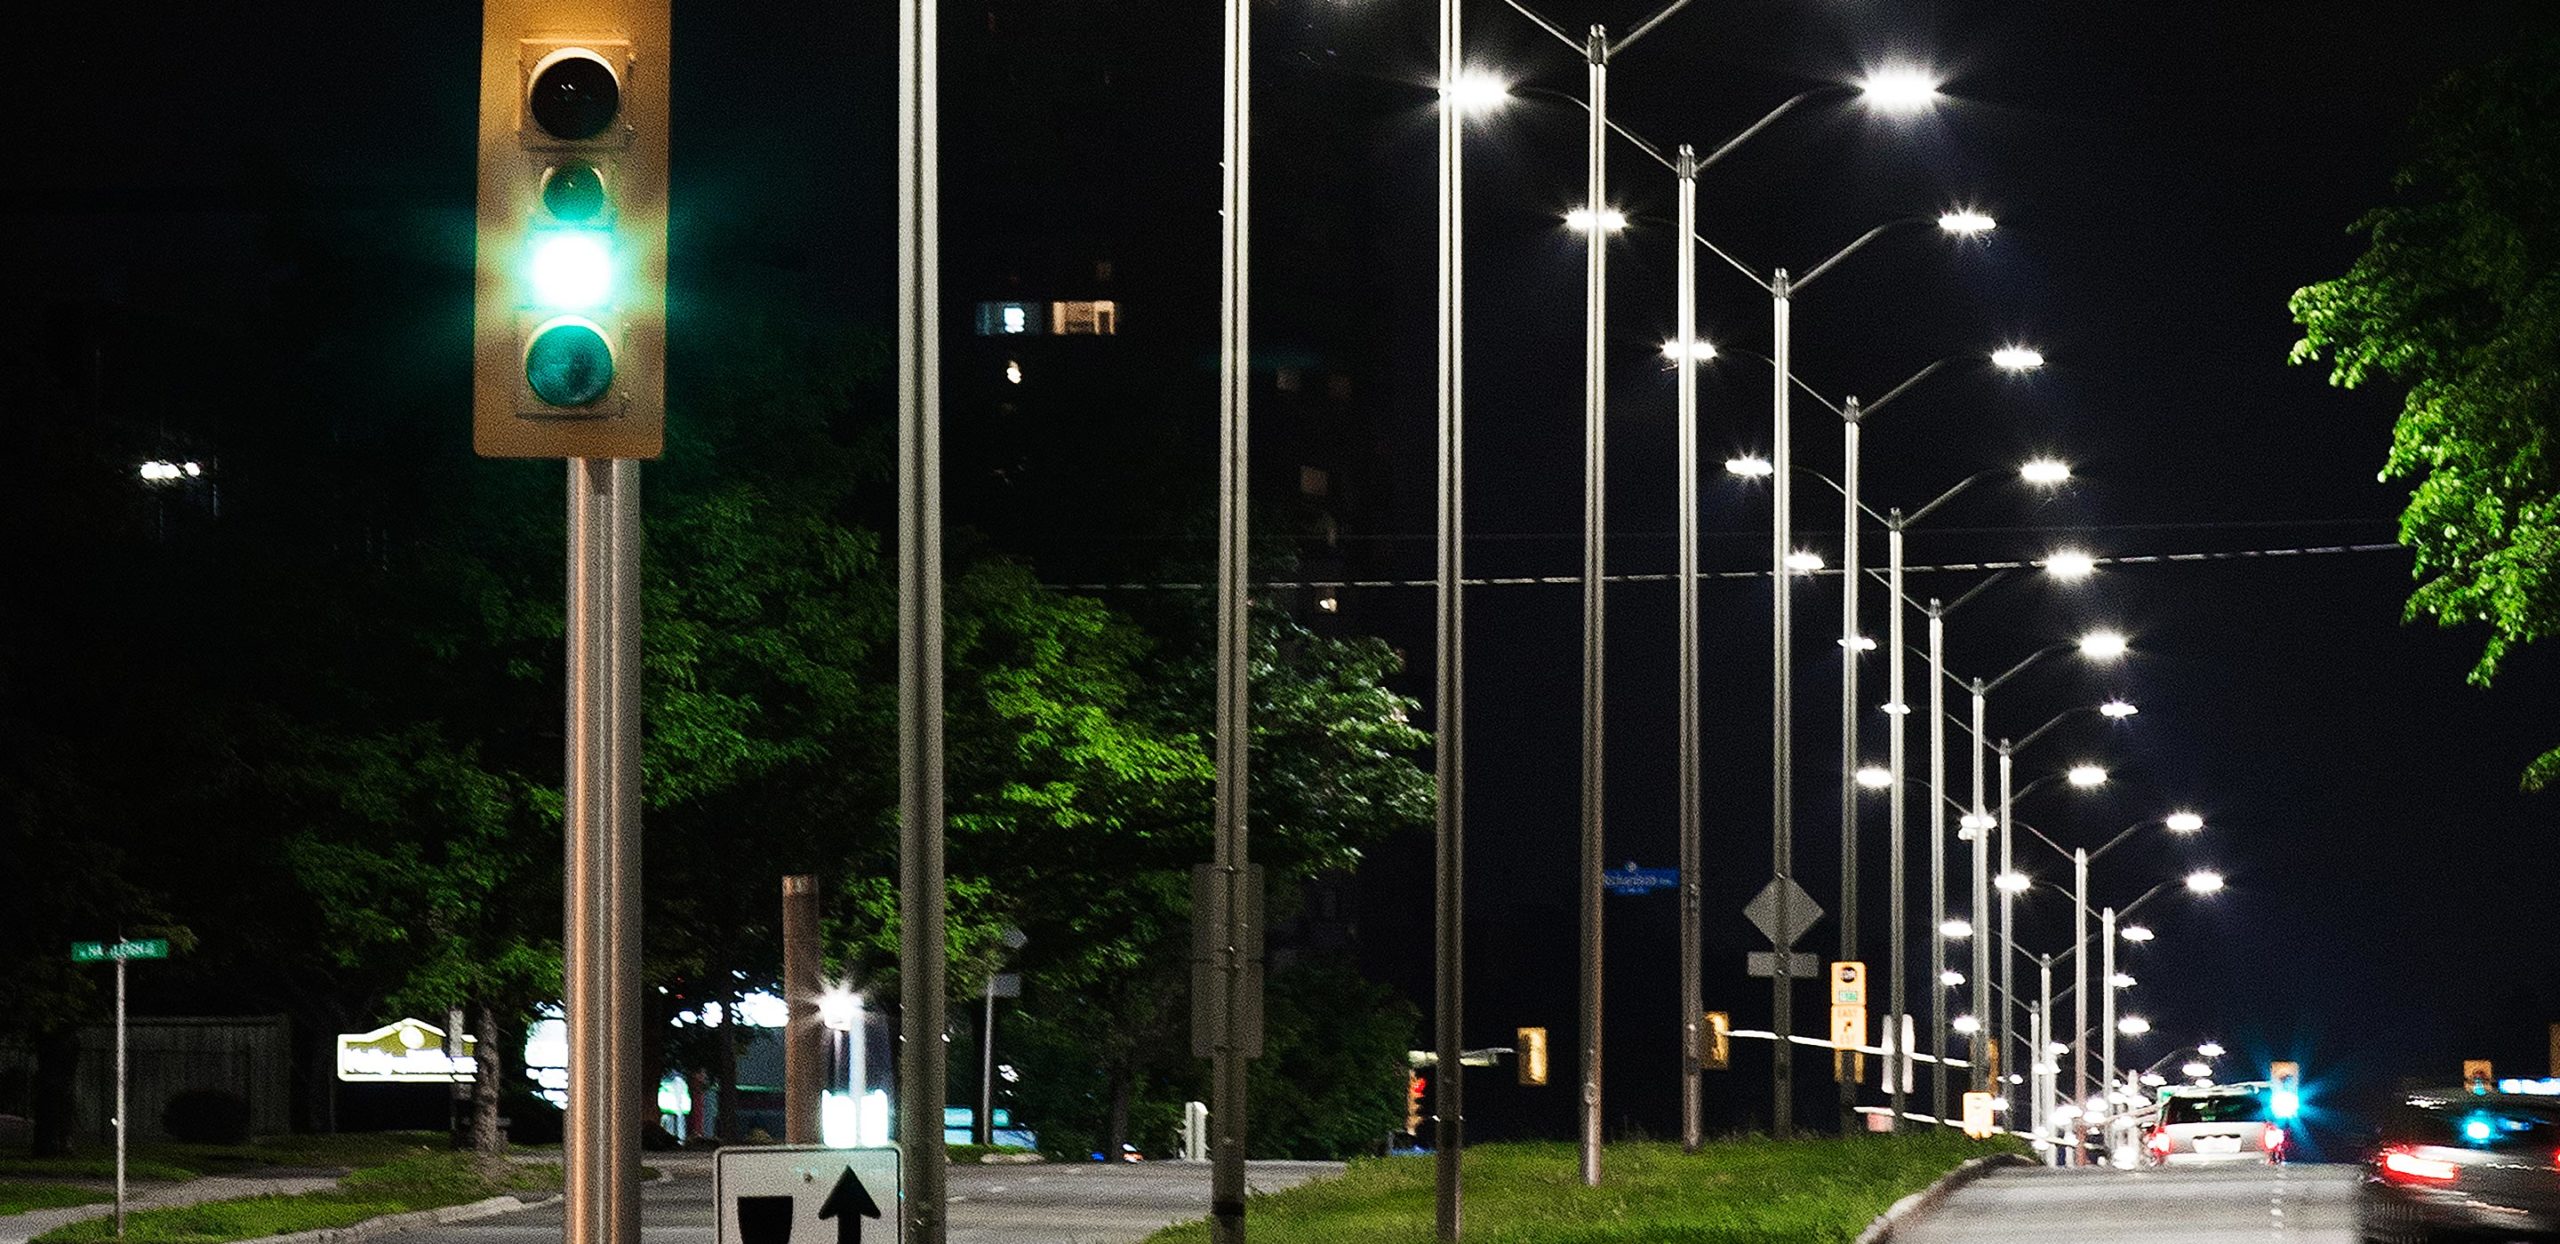 LED street light conversion: The future is bright for smart city lights